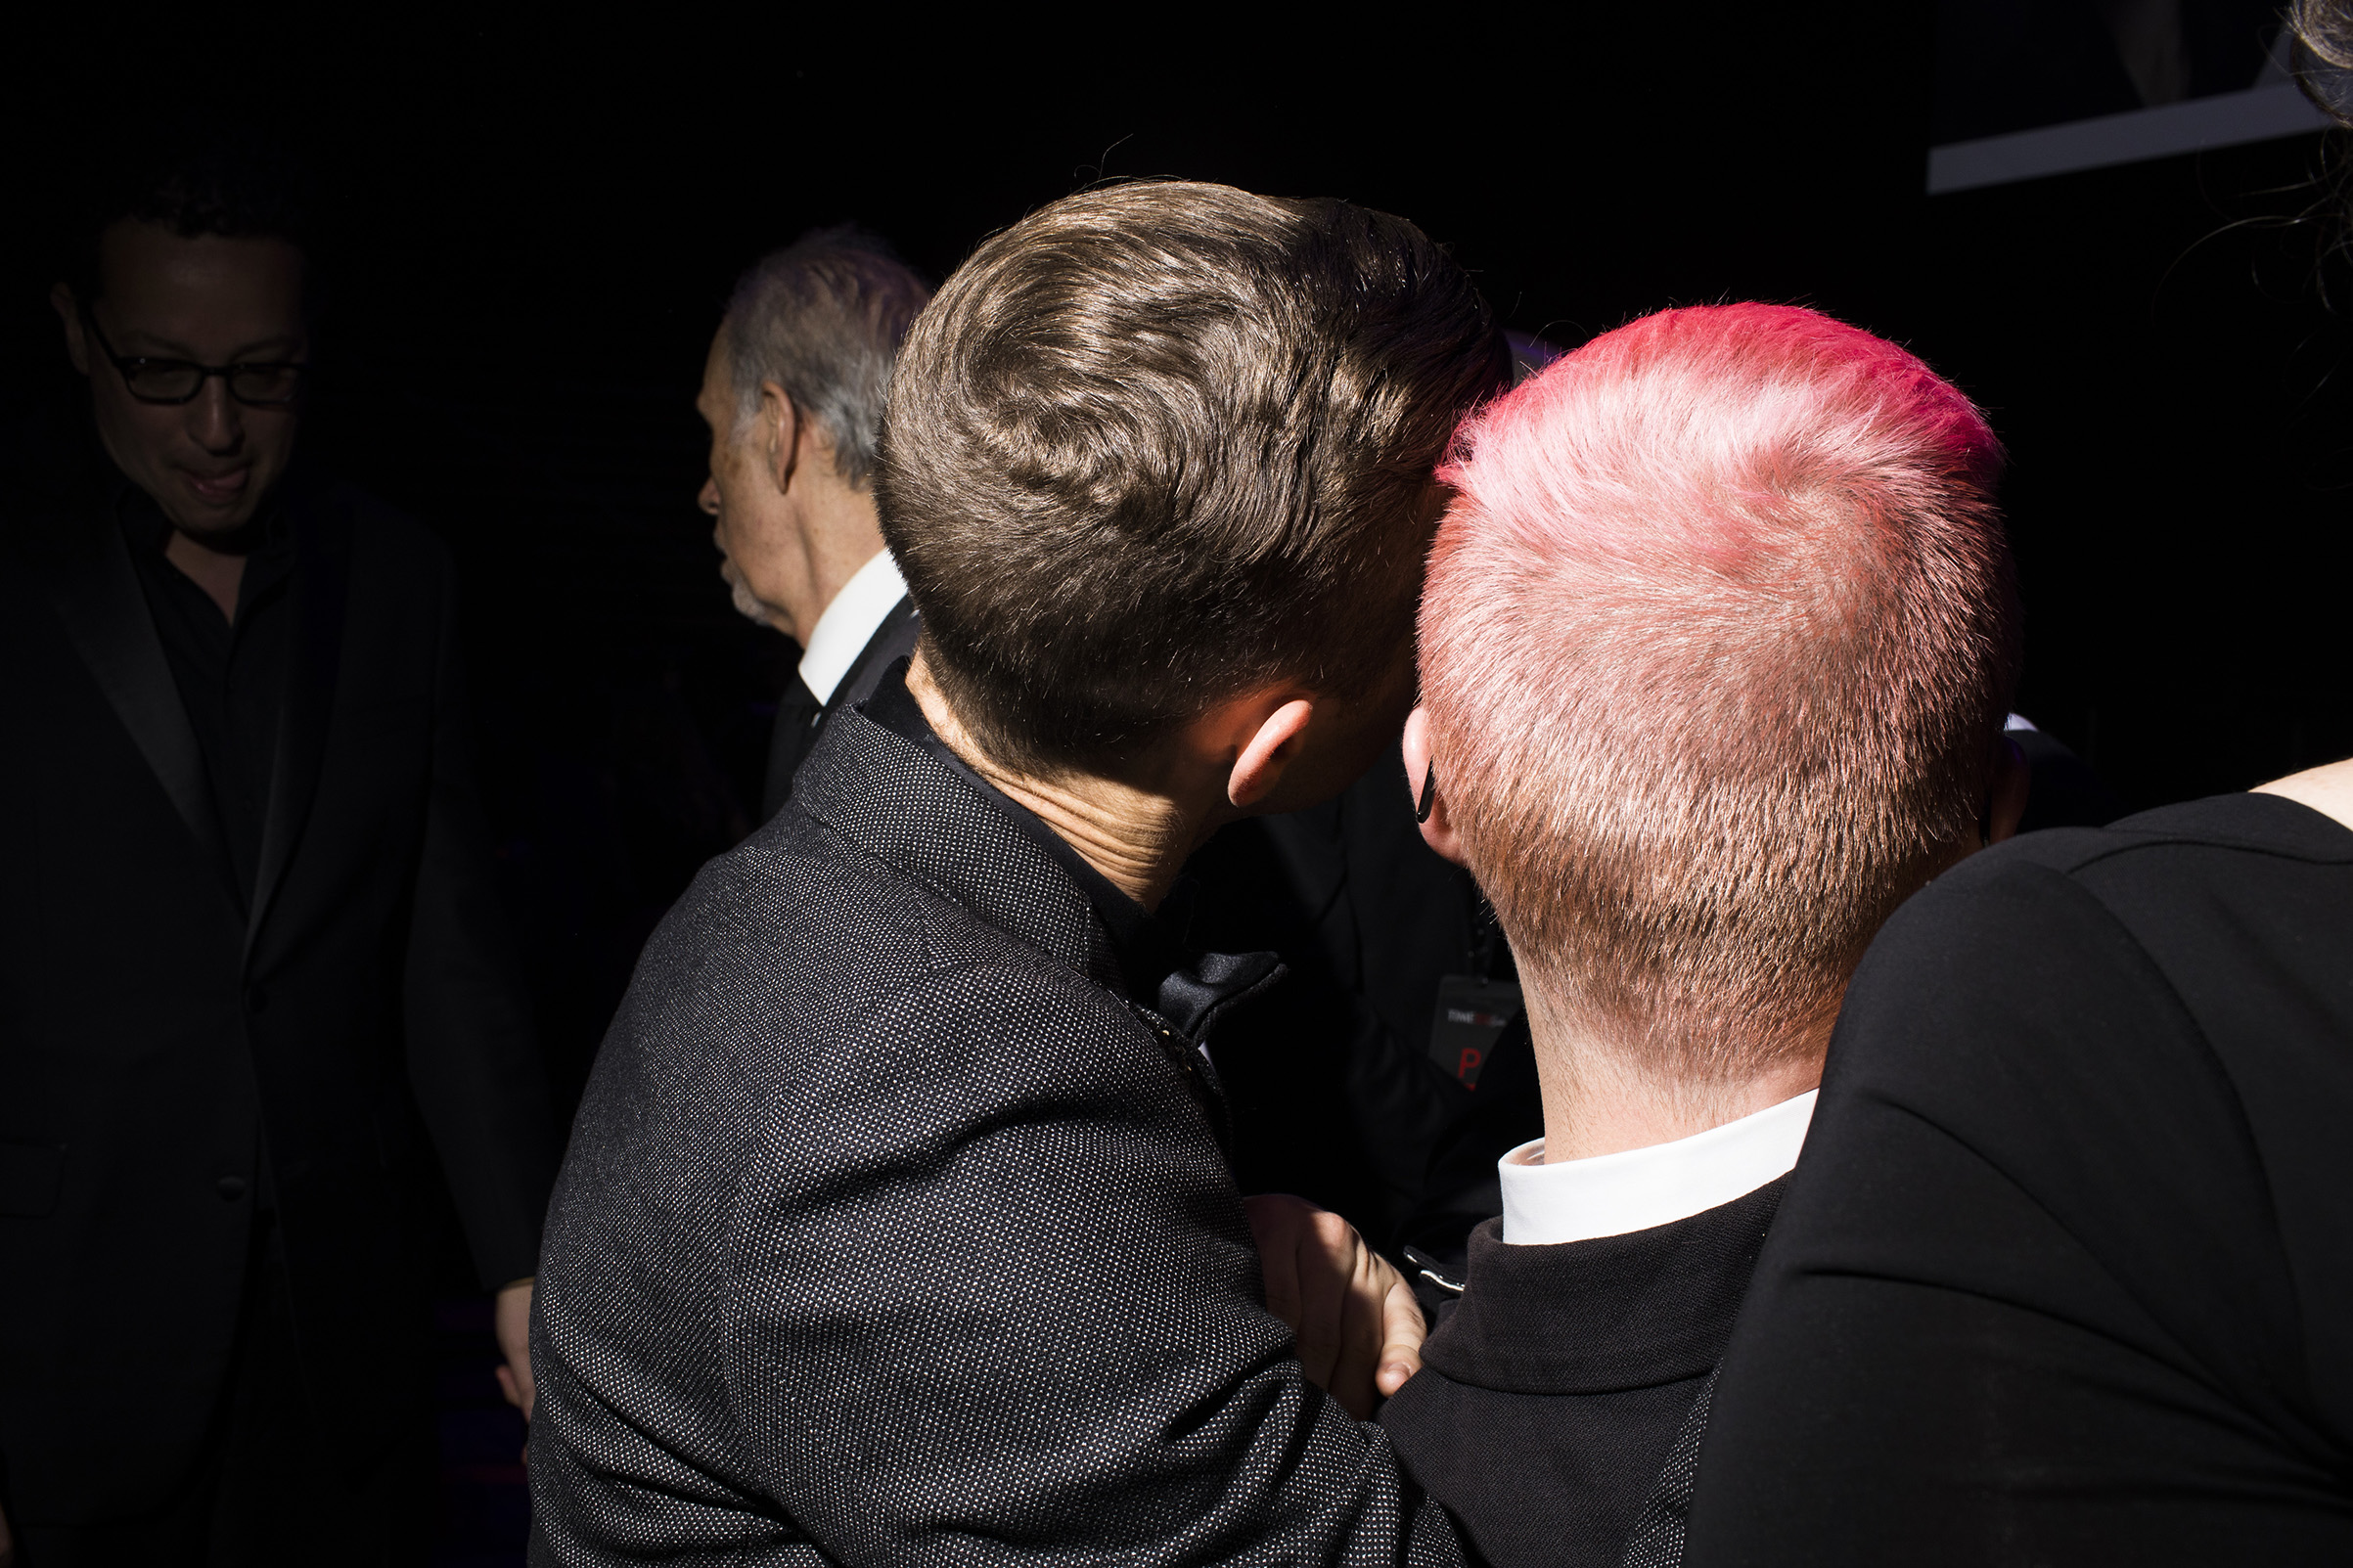 Olympic figure skater Adam Rippon and Cambridge Analytica whistleblower Christopher Wylie at the Time 100 Gala at Jazz at Lincoln Center on April 24, 2018 in New York City. (Landon Nordeman for TIME)